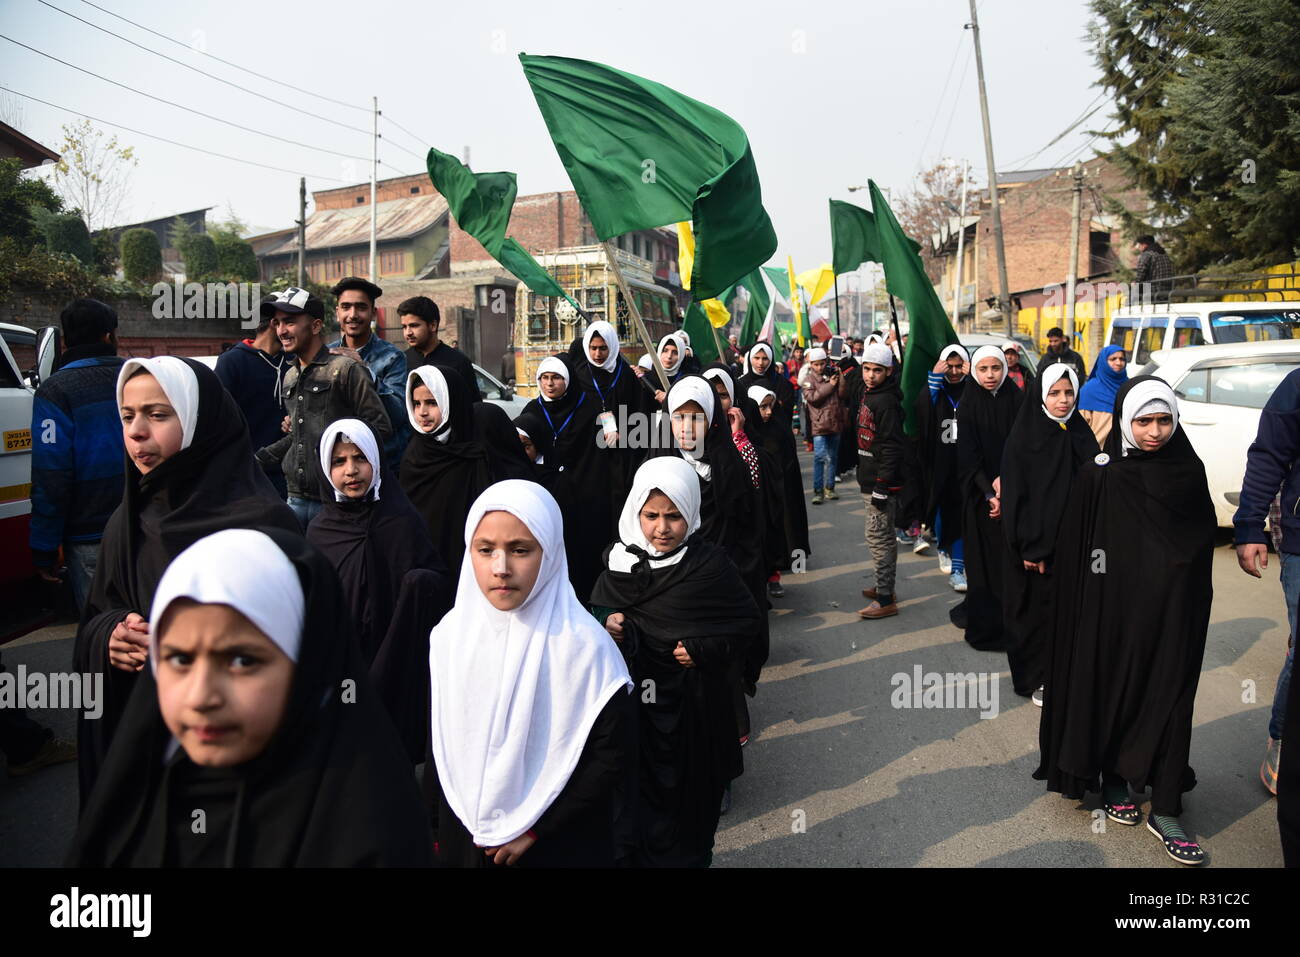 Kashmiri Shia Muslim students are seen Marching in a rally during celebrations marking Eid-i-Milad-un-Nabi, the birth anniversary of Prophet Muhammad PBUH. Muslims across the world celebrated Eid-e-Milad-un-Nabi, the birth anniversary of the Prophet Mohammed on 12 Rabil ul Awal, a month of the Muslim calendar which falls on 21 November 2018. Stock Photo